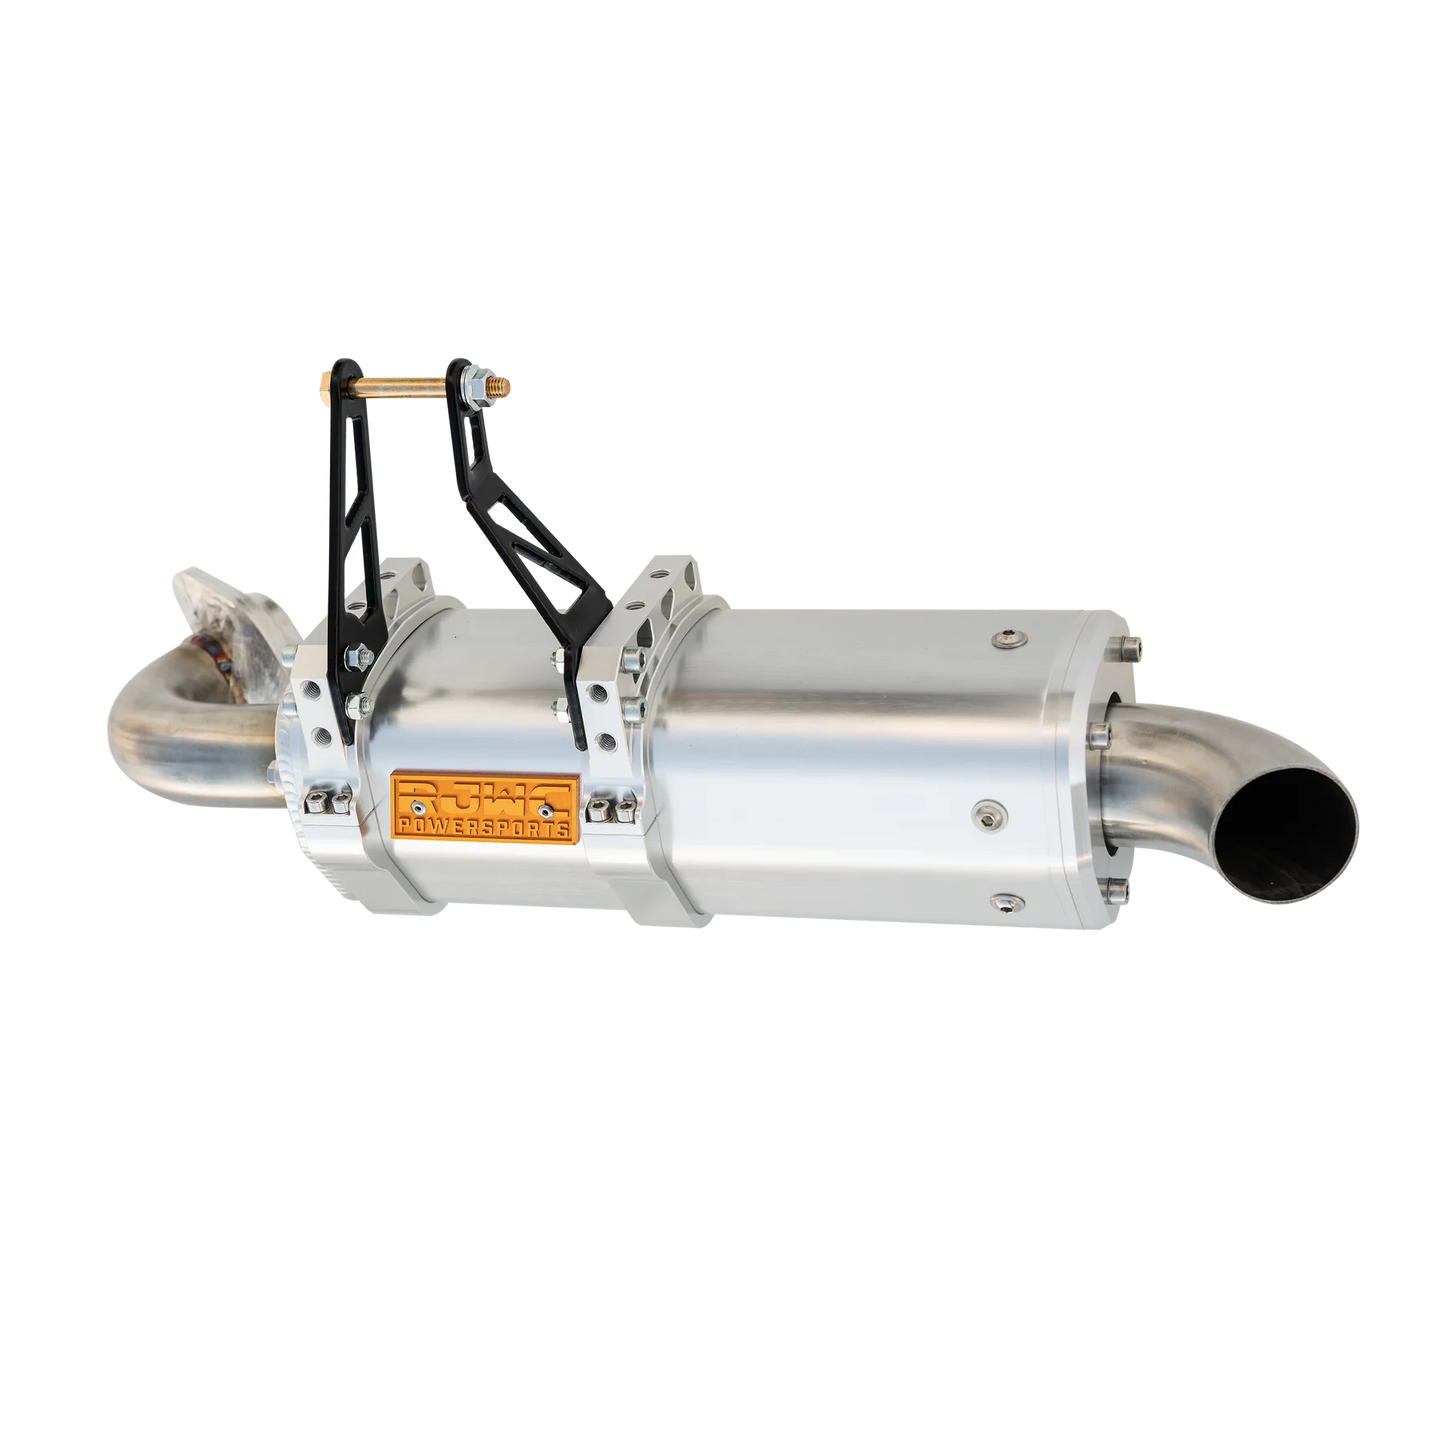 RJWC - ZFORCE 800 TRAIL/950 TRAIL/950 SPORT (G2) - APX SLIP-ON EXHAUST